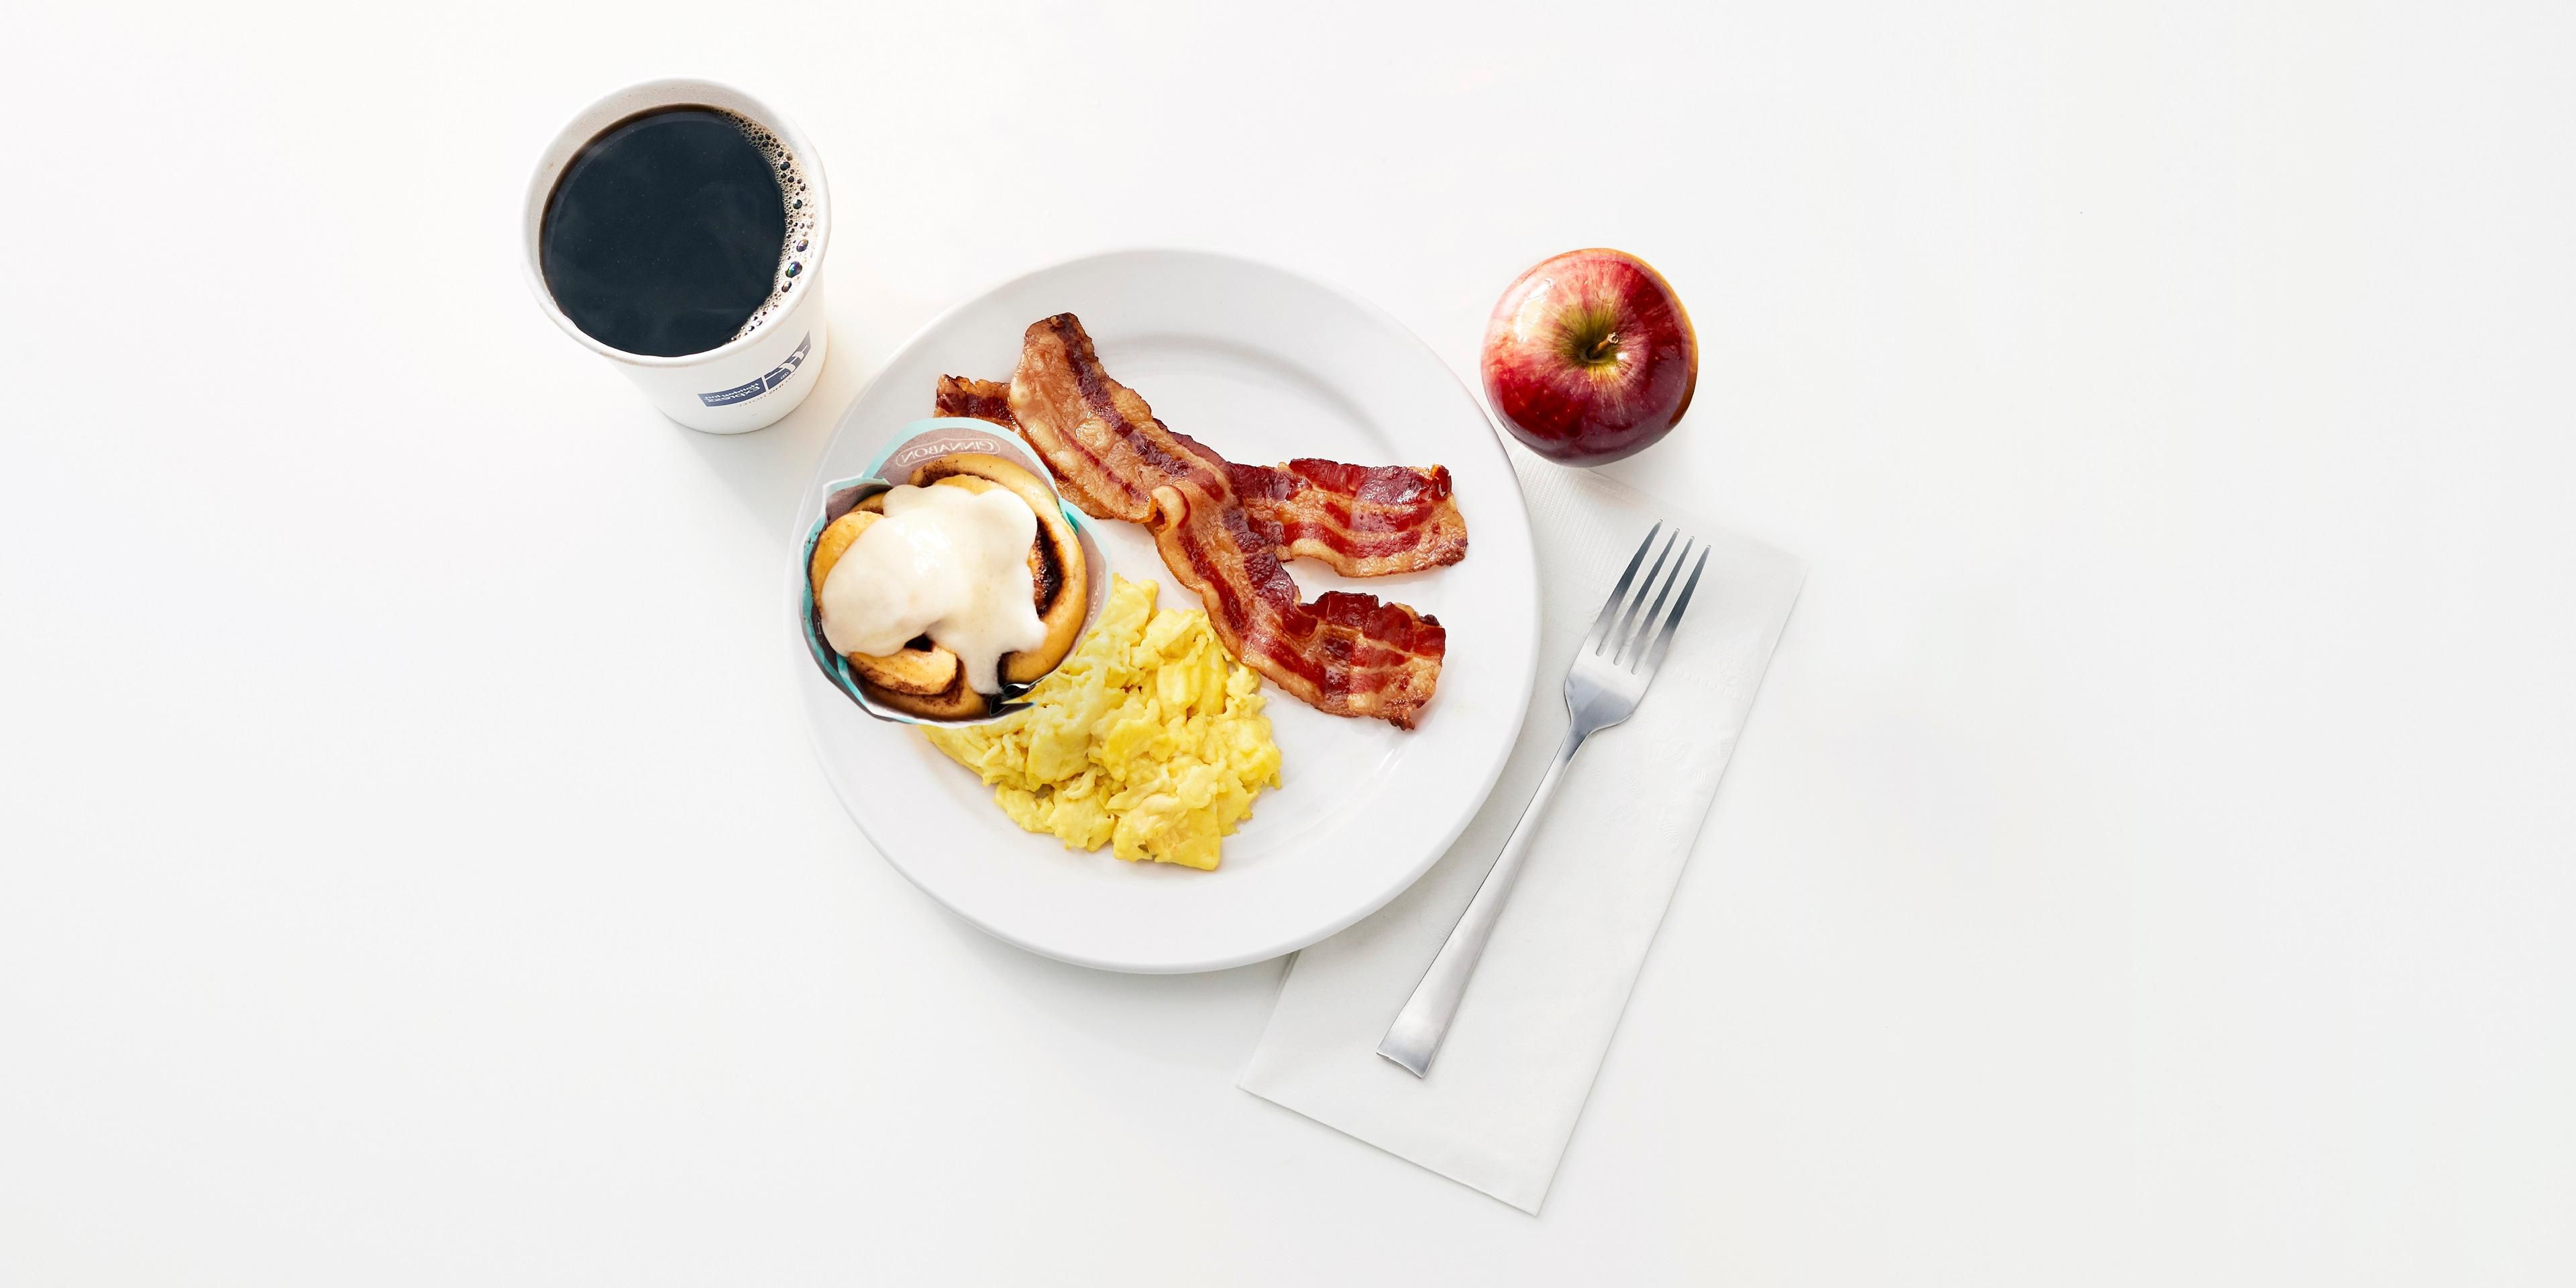 Kick start your day with our free Express Start Breakfast, with grab ‘n’ go options and favorites such as eggs and bacon, hot pancakes, our signature cinnamon rolls and fresh coffee. Offered Monday through Friday from 6AM to 9:30AM and Saturday through Sunday from 7AM to 10AM.